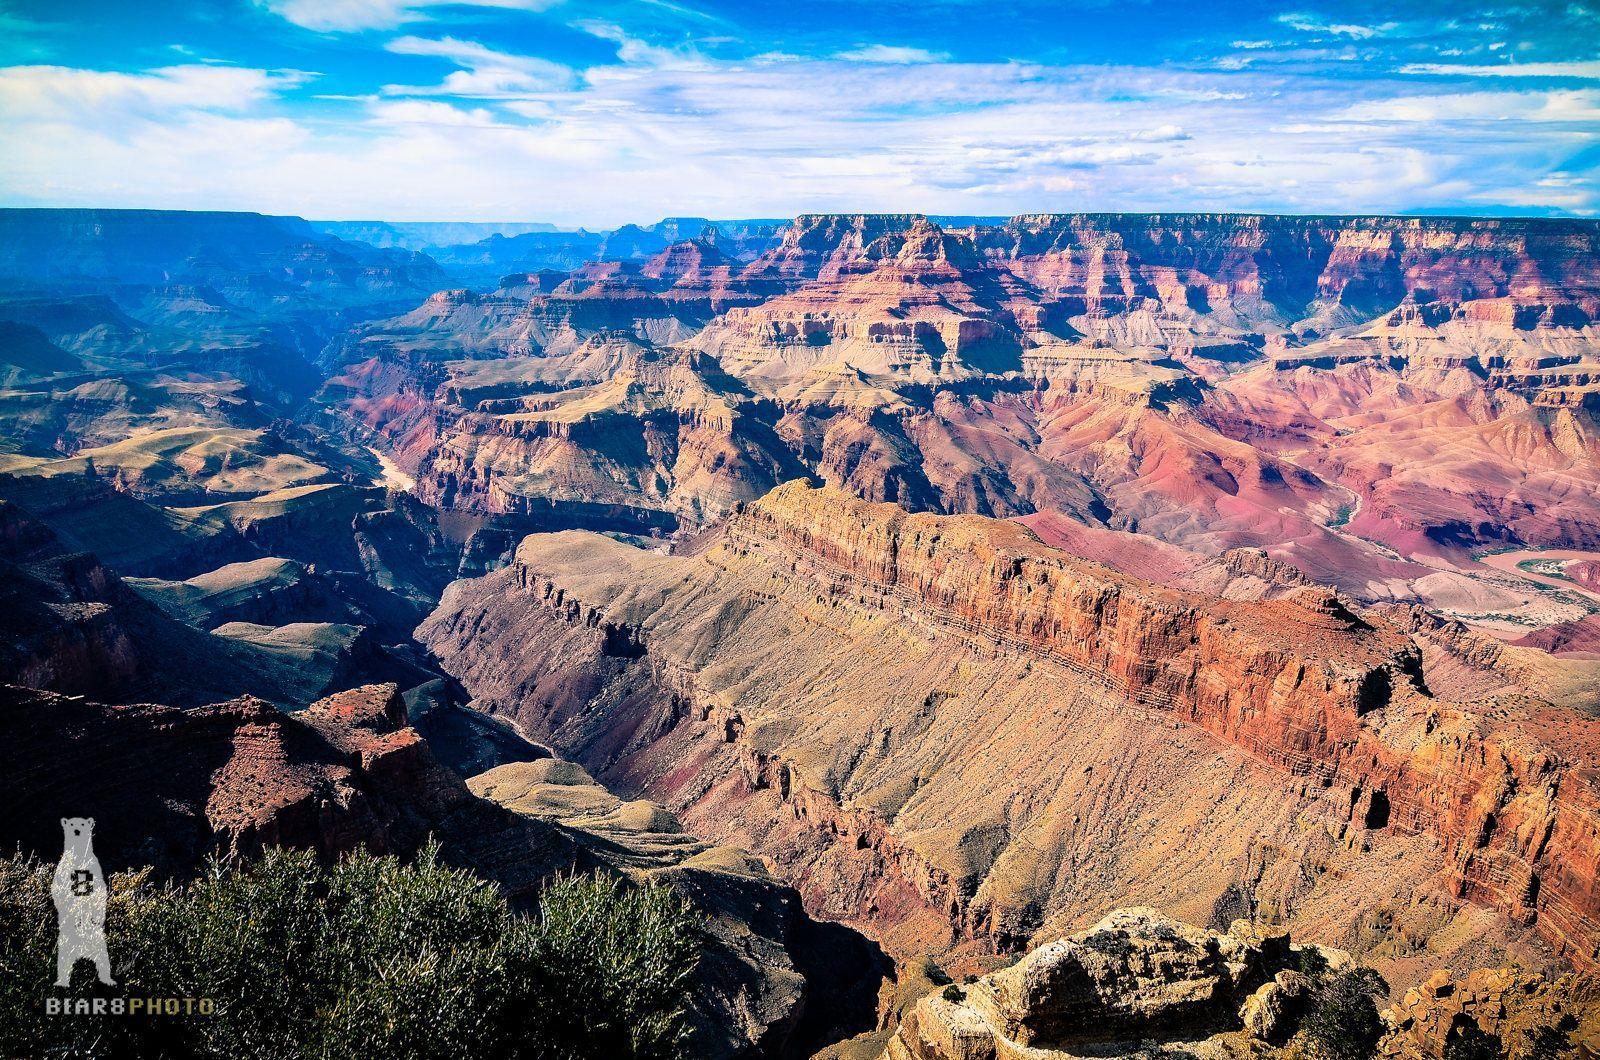 Grand Canyon, Nature Photography Prints, Travel Gifts, Southwest